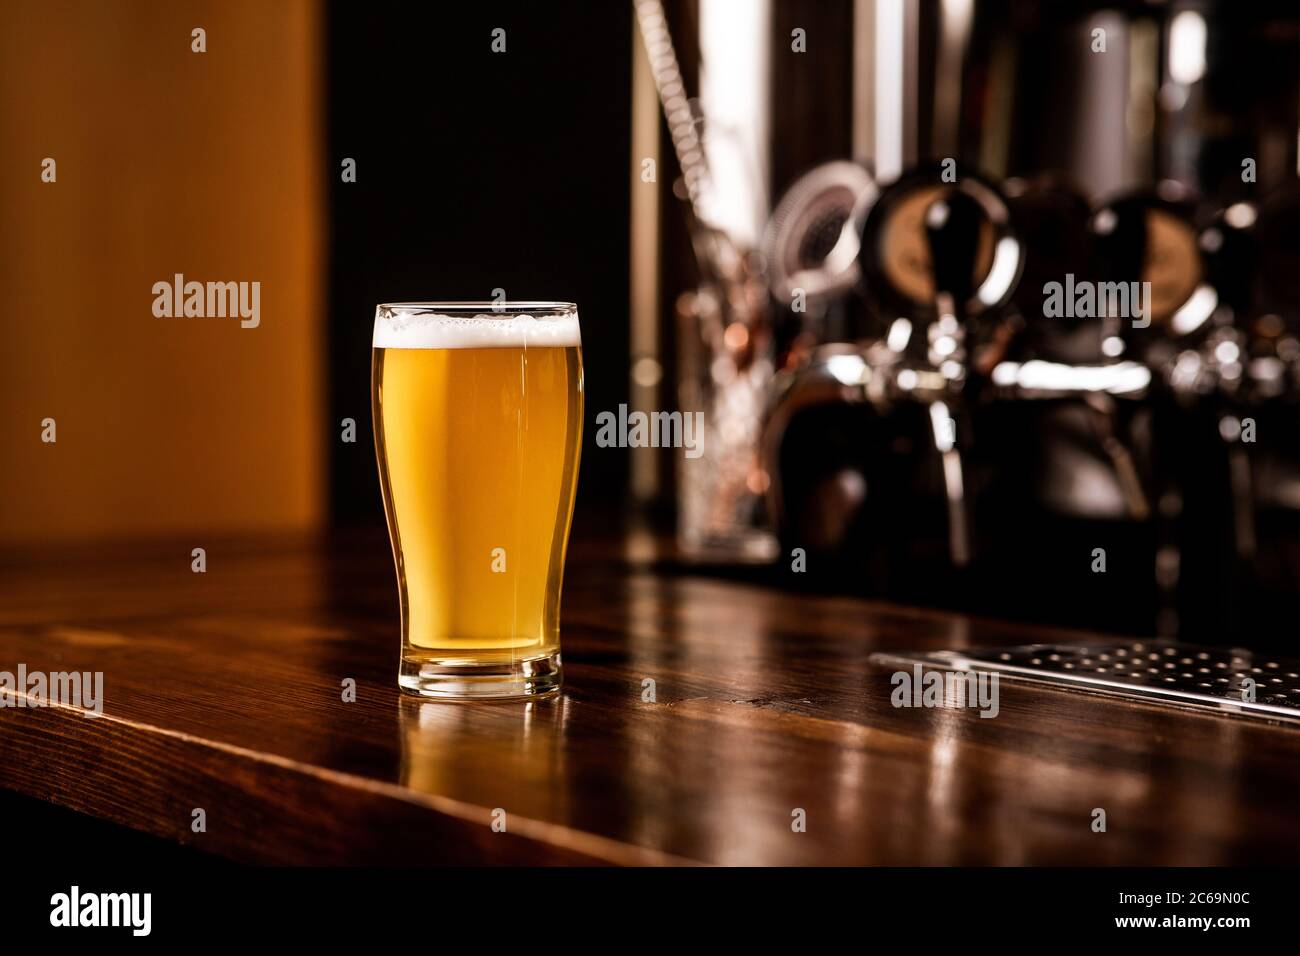 Light beer in glass. Ale with foam on brown wooden counter, metal taps near Stock Photo